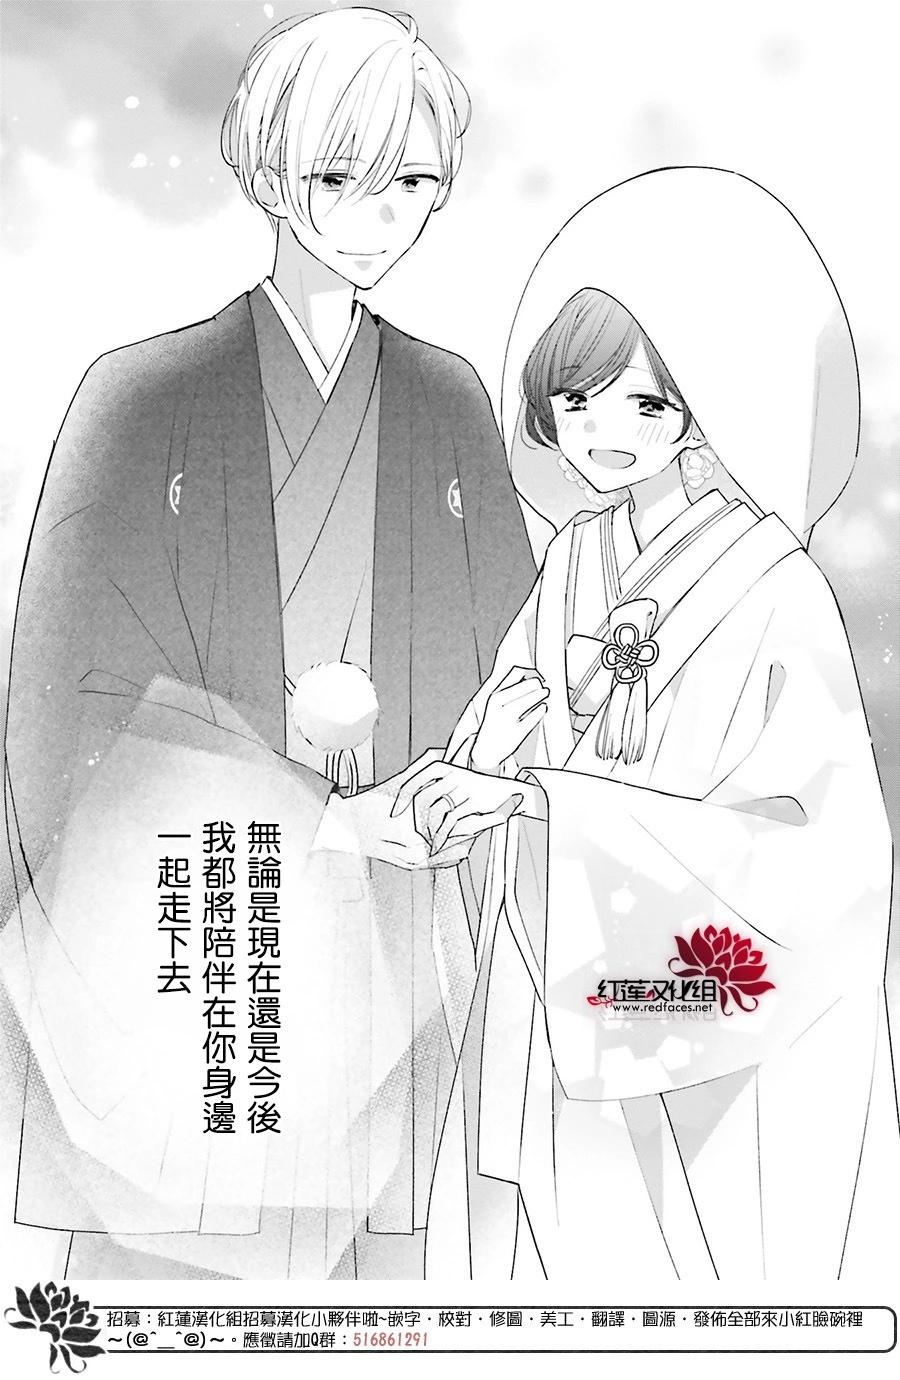 If given a second chance - 第46話 正篇終(2/2) - 5